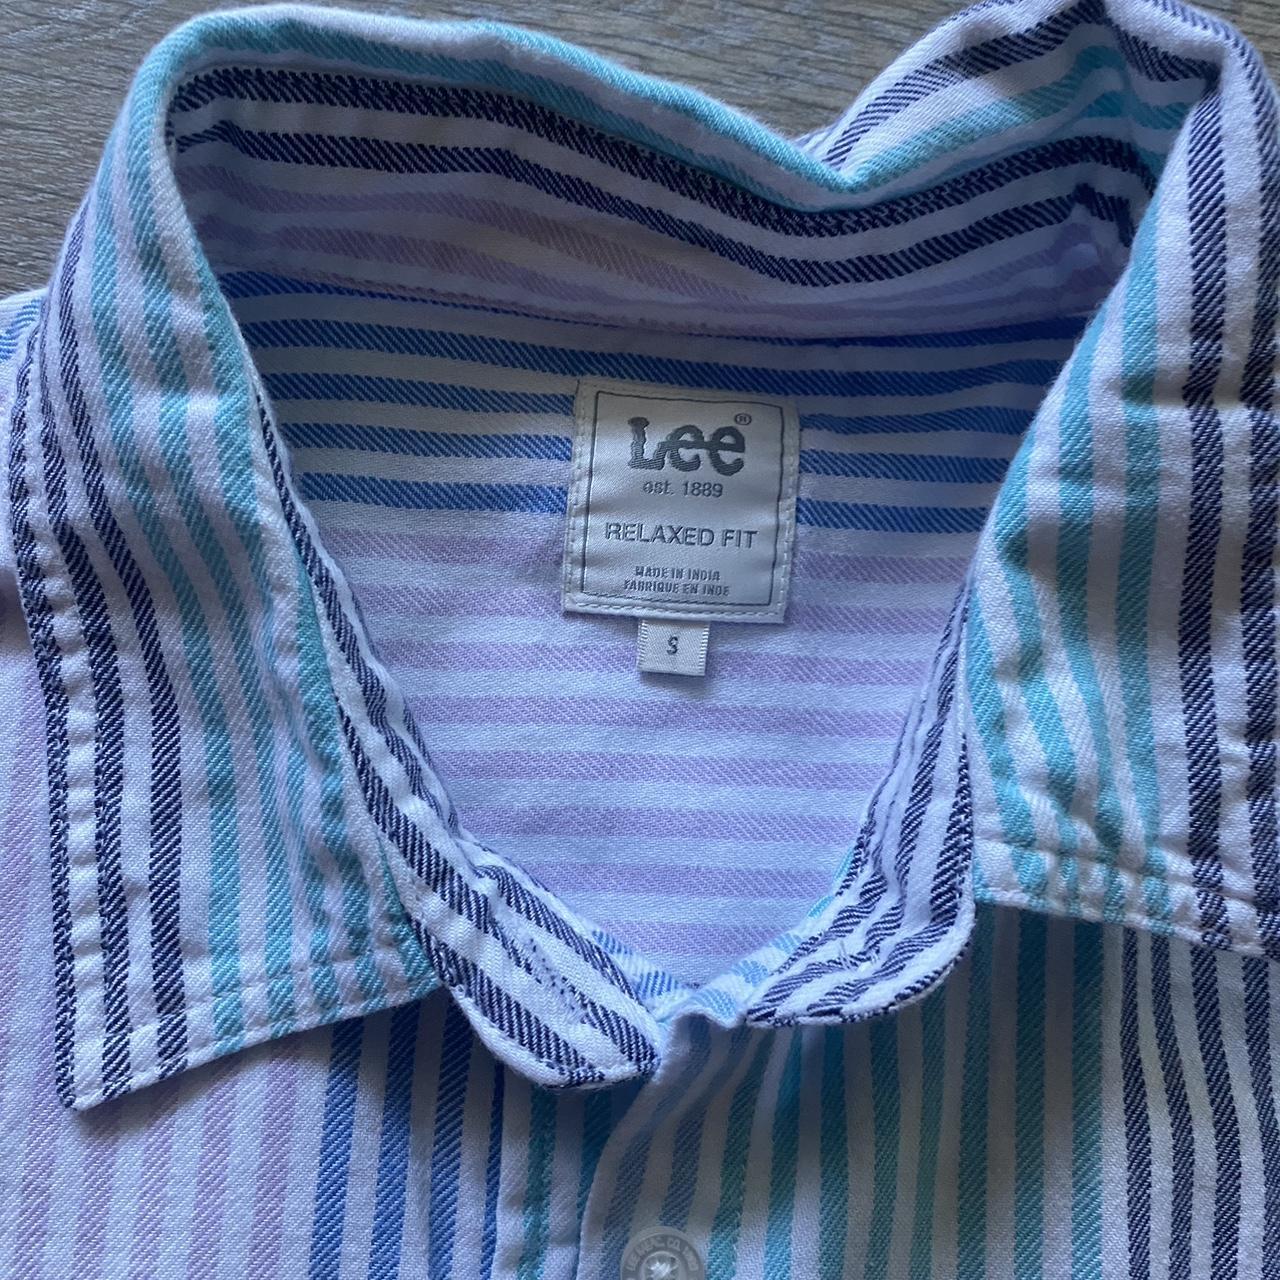 Lee Relaxed Fit Striped Button Up Never Warn but no... - Depop